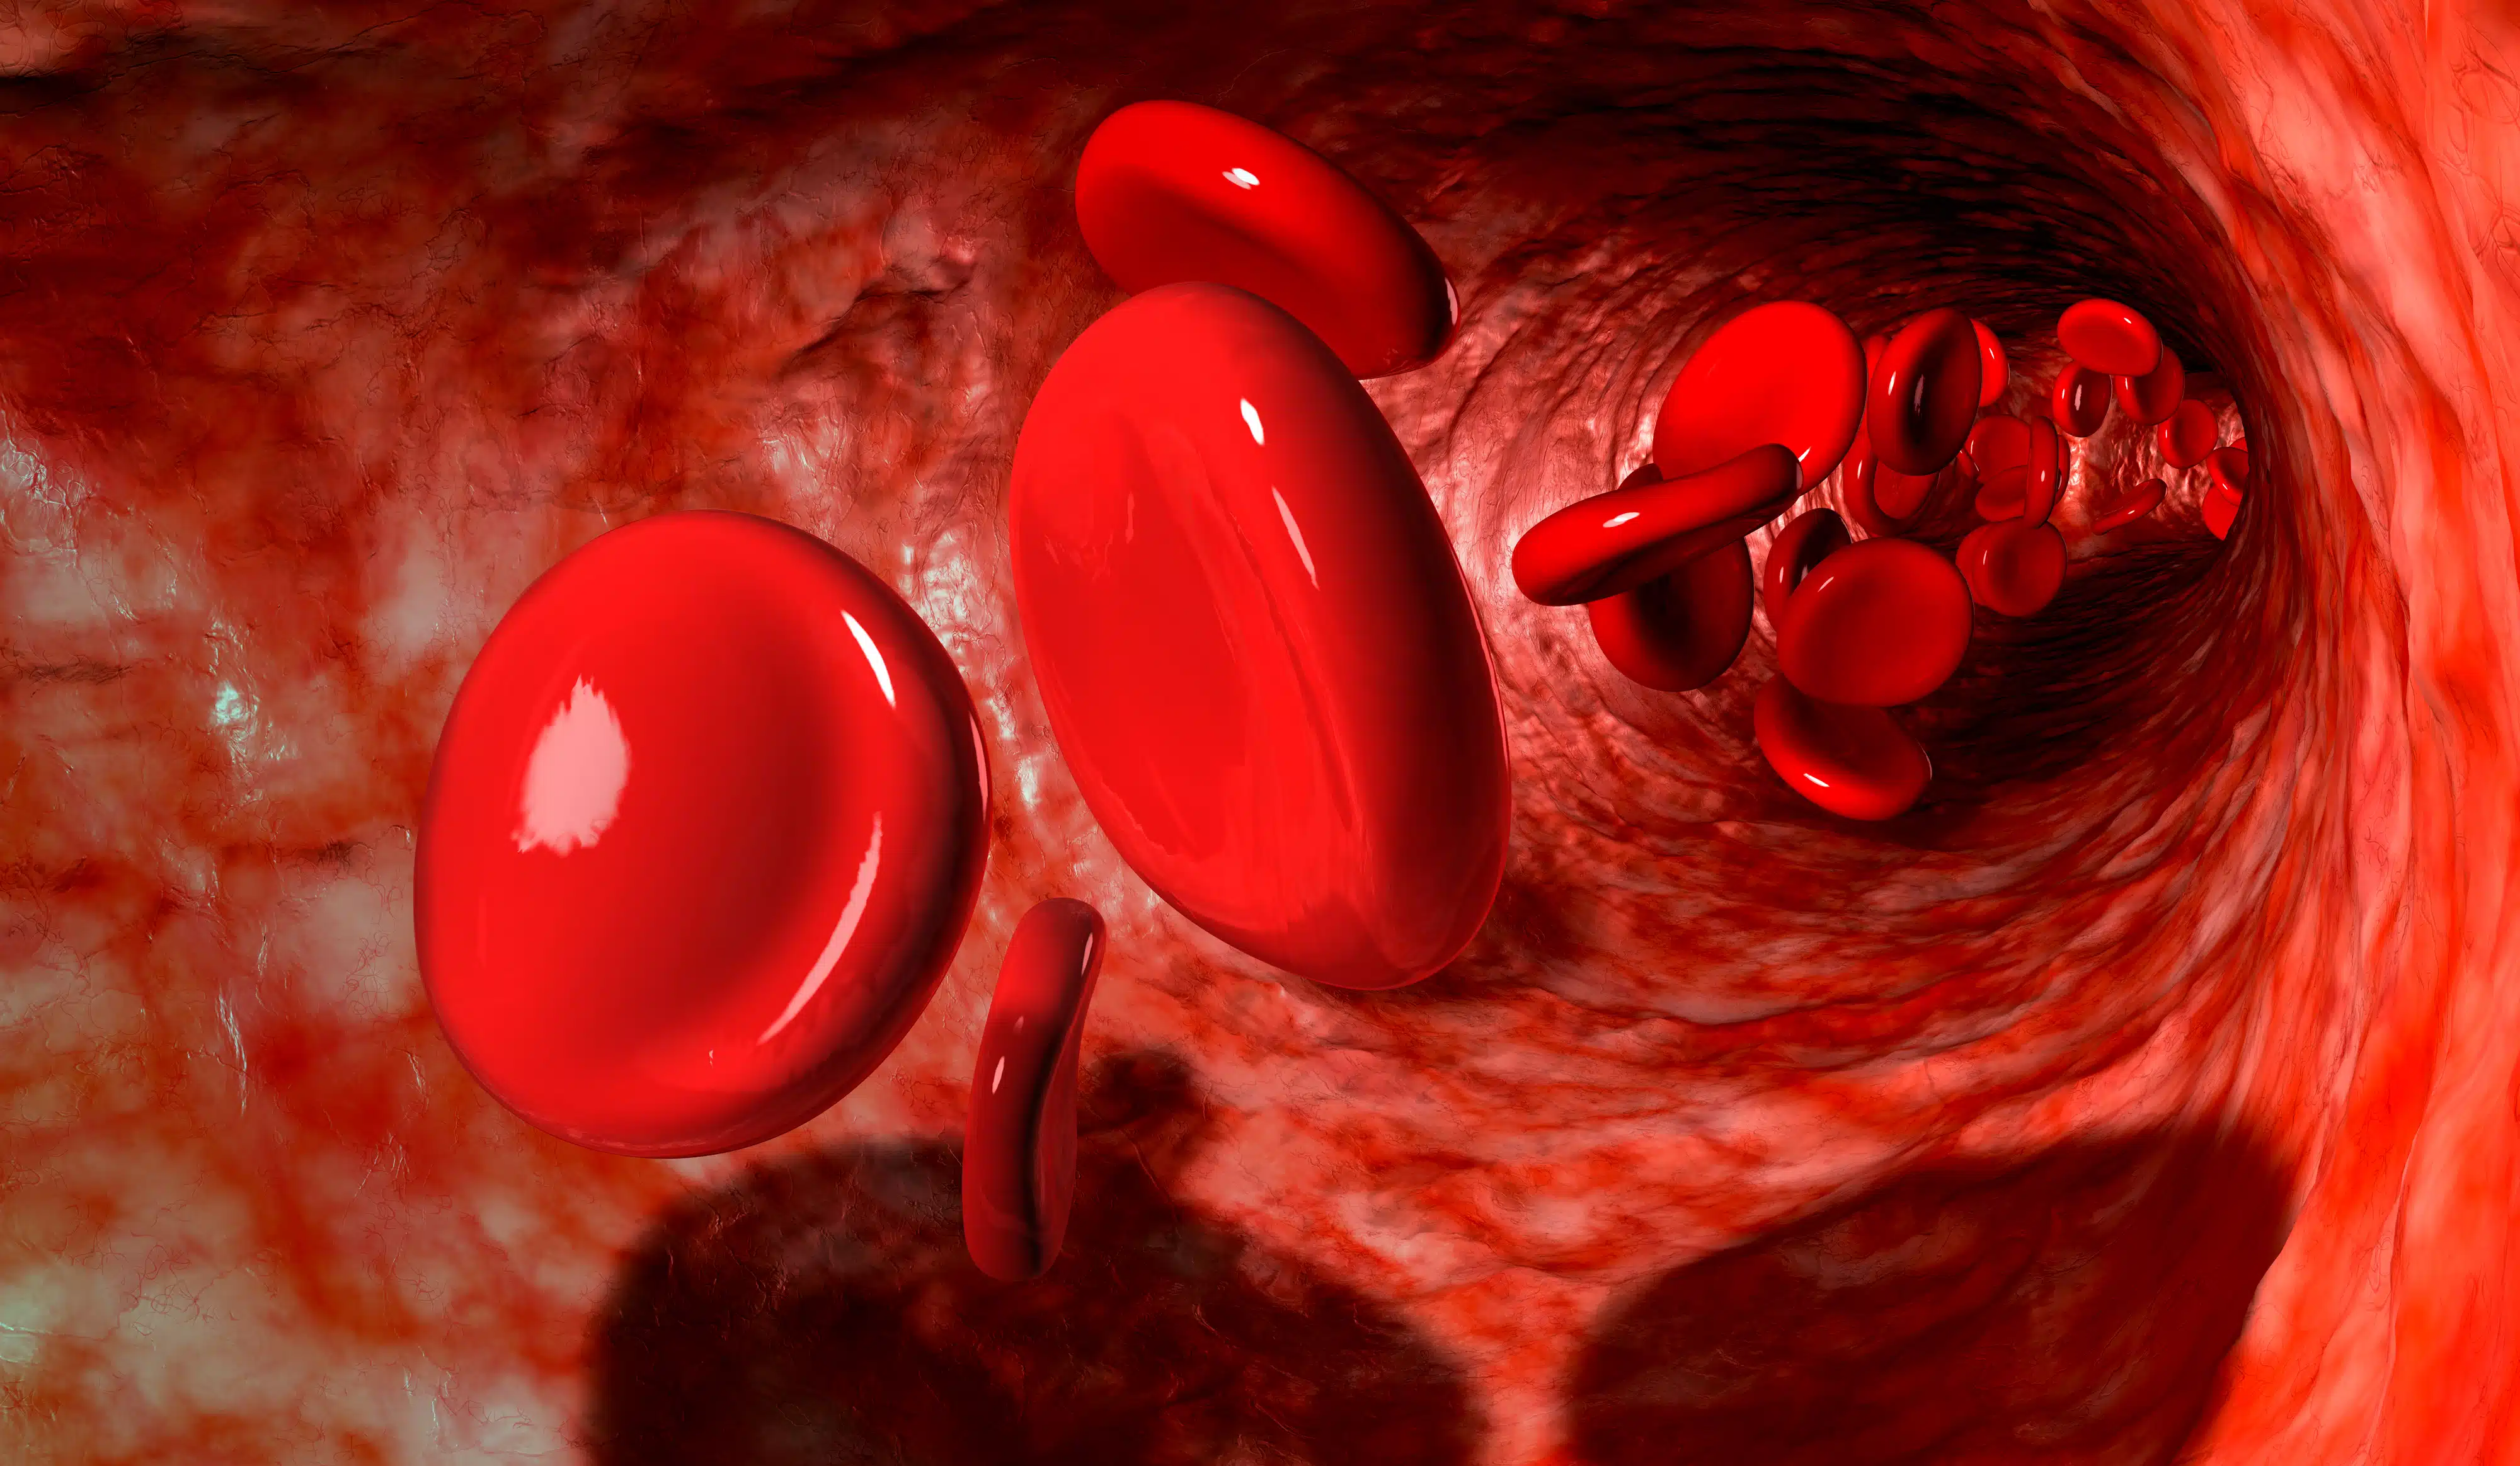 Red blood cells in a vein (illustration) Image: depositphotos.com